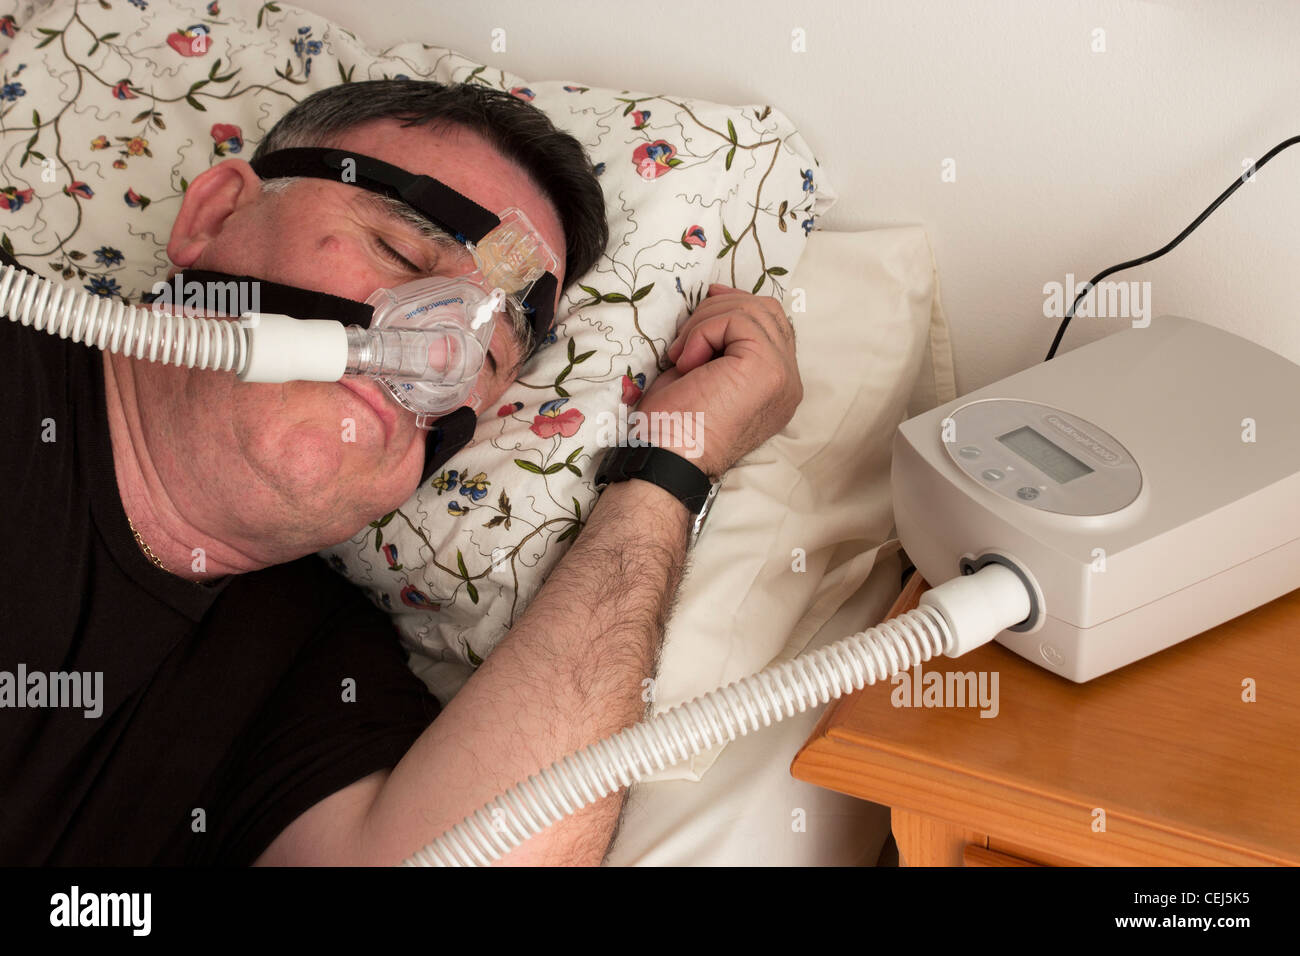 Man using a CPAP face mask and machine used for the treatment of sleep apnea. Stock Photo